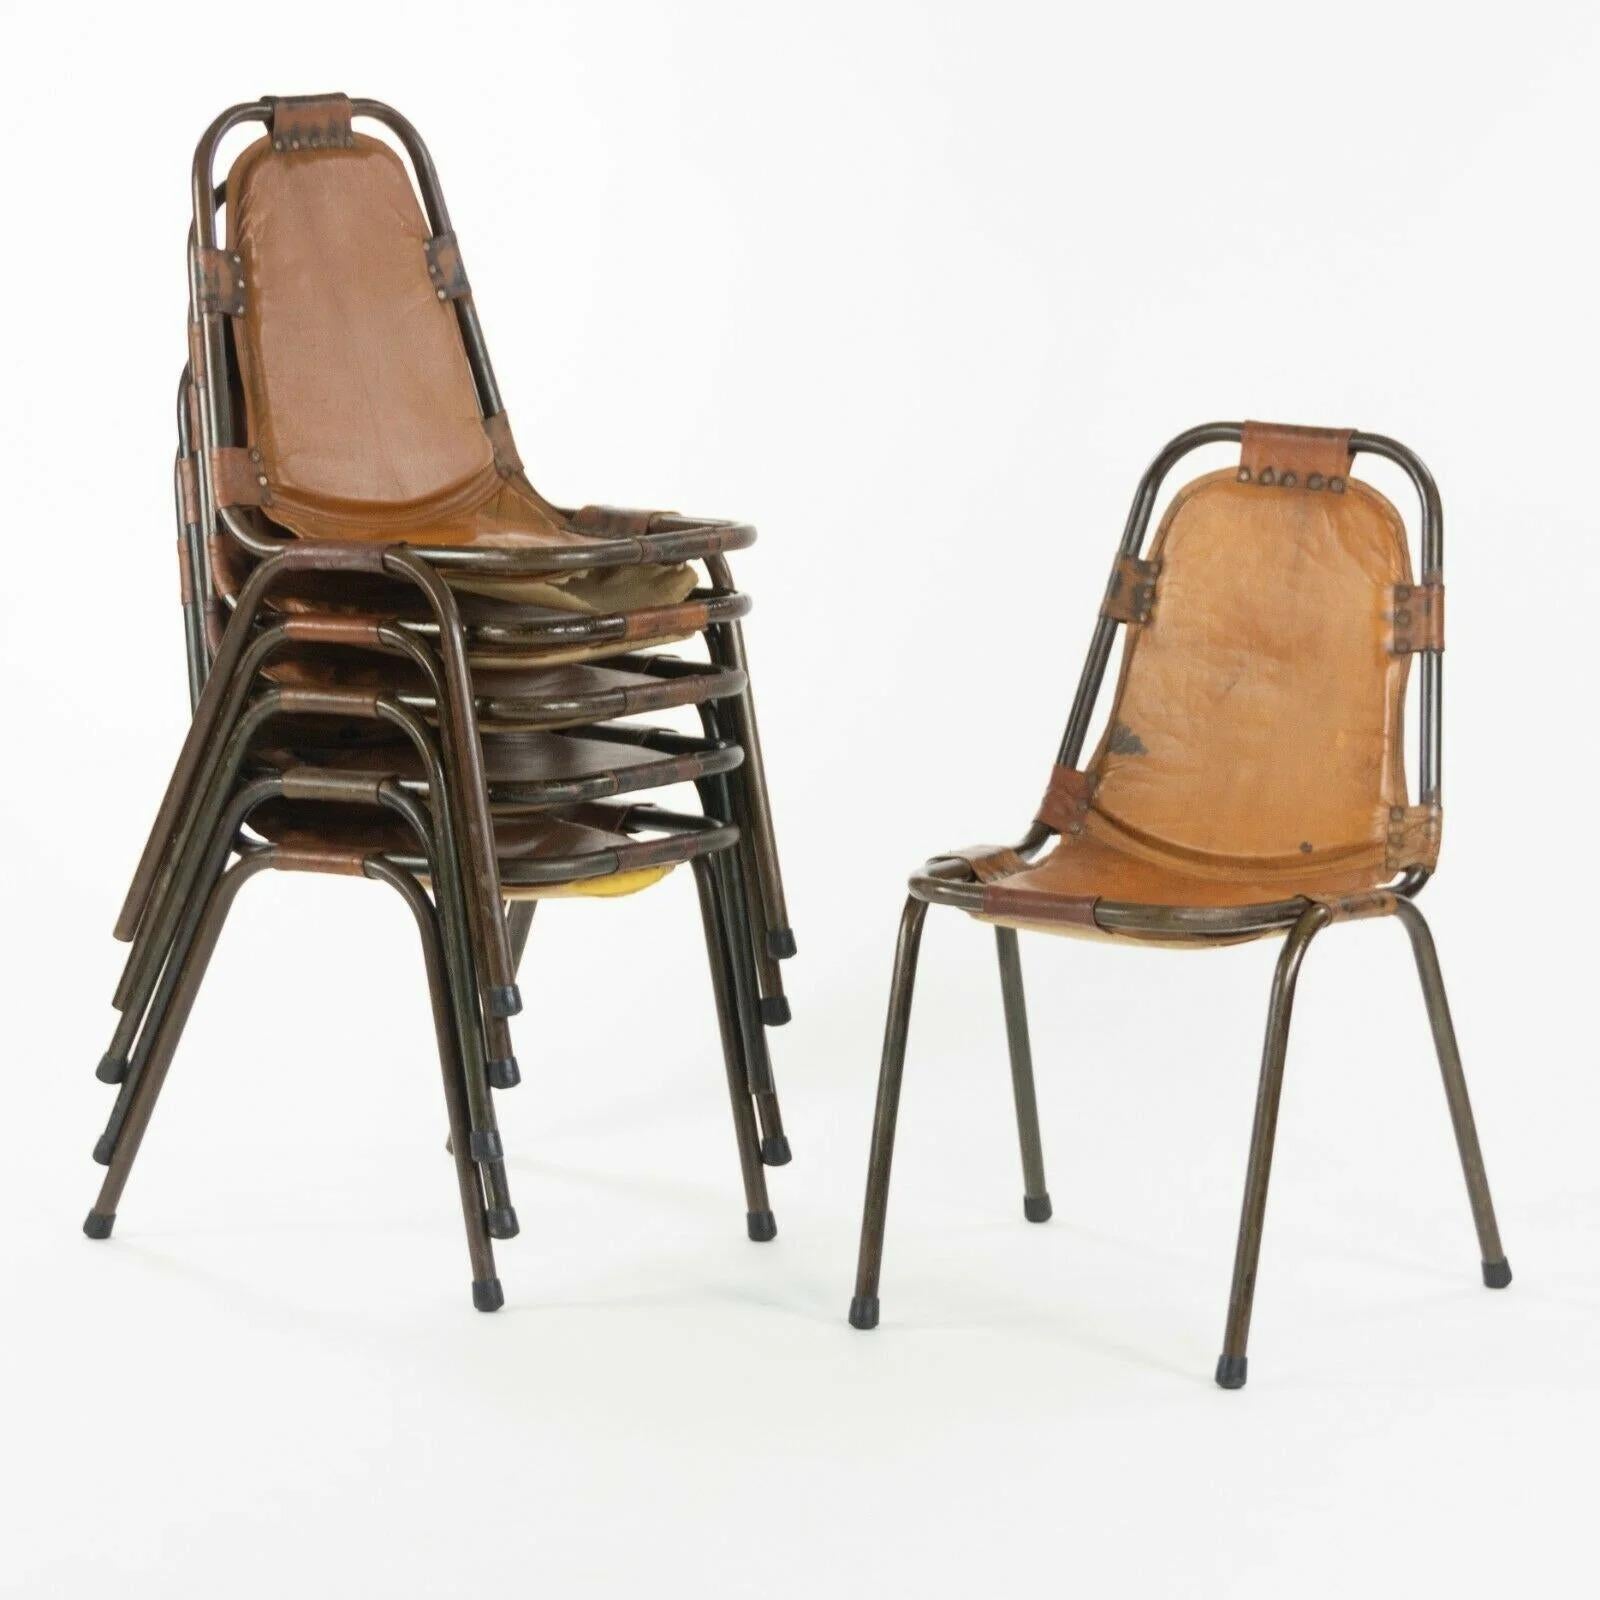 Listed for sale is a set of stacking chairs, believed to be produced by the Italian manufacturer Dal Vera. Charlotte Perriand had selected the chairs for use in the Les Arcs ski resort in France. This gorgeous set of six chairs came from a notable